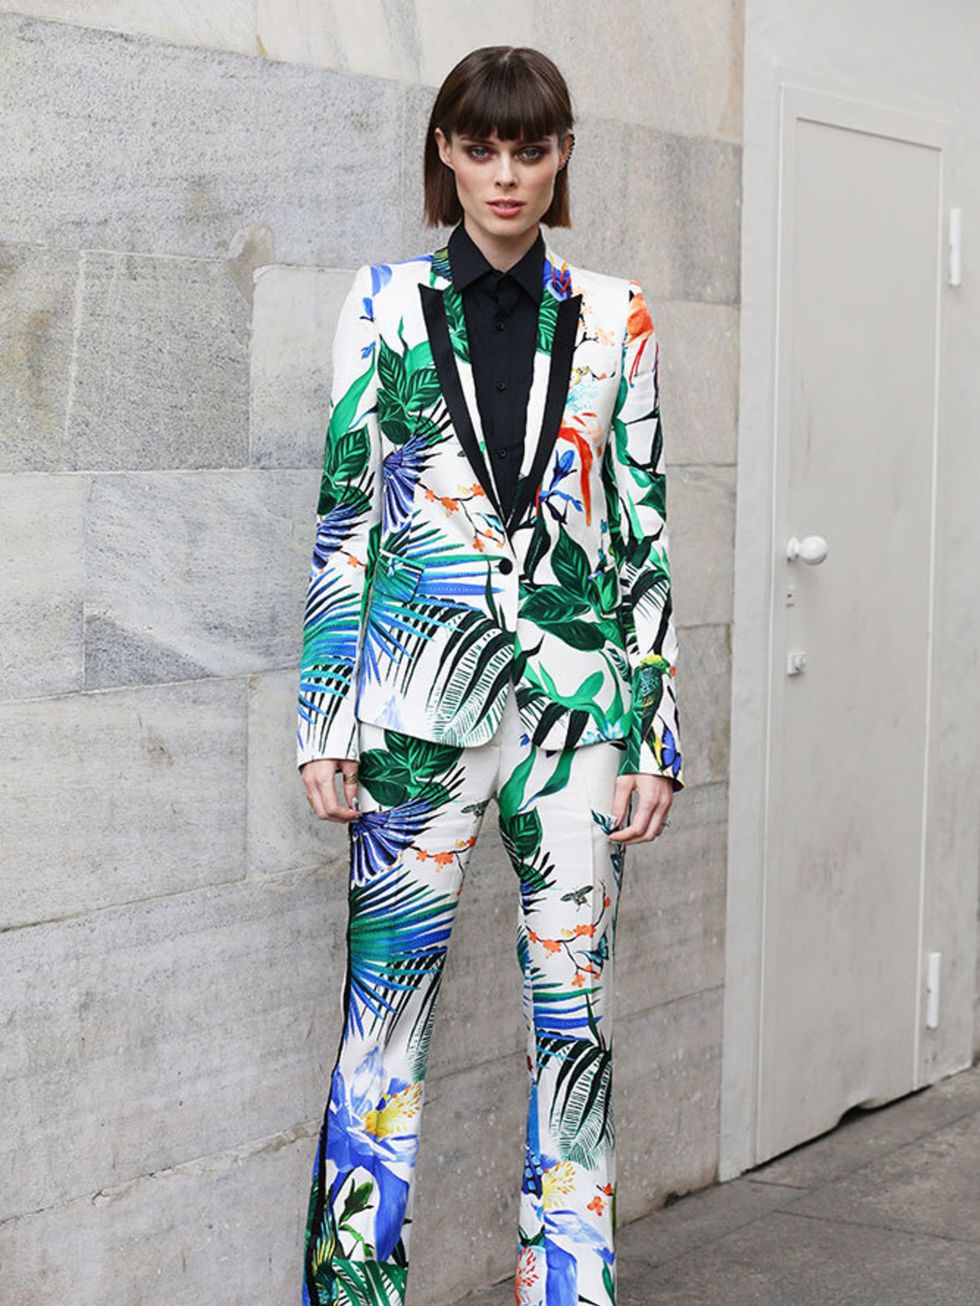 Coco Rocha attends the Roberto Cavalli - Show as part of Milan Fashion Week Womenswear Spring/Summer 2015 on September 20, 2014 in Milan, Italy.